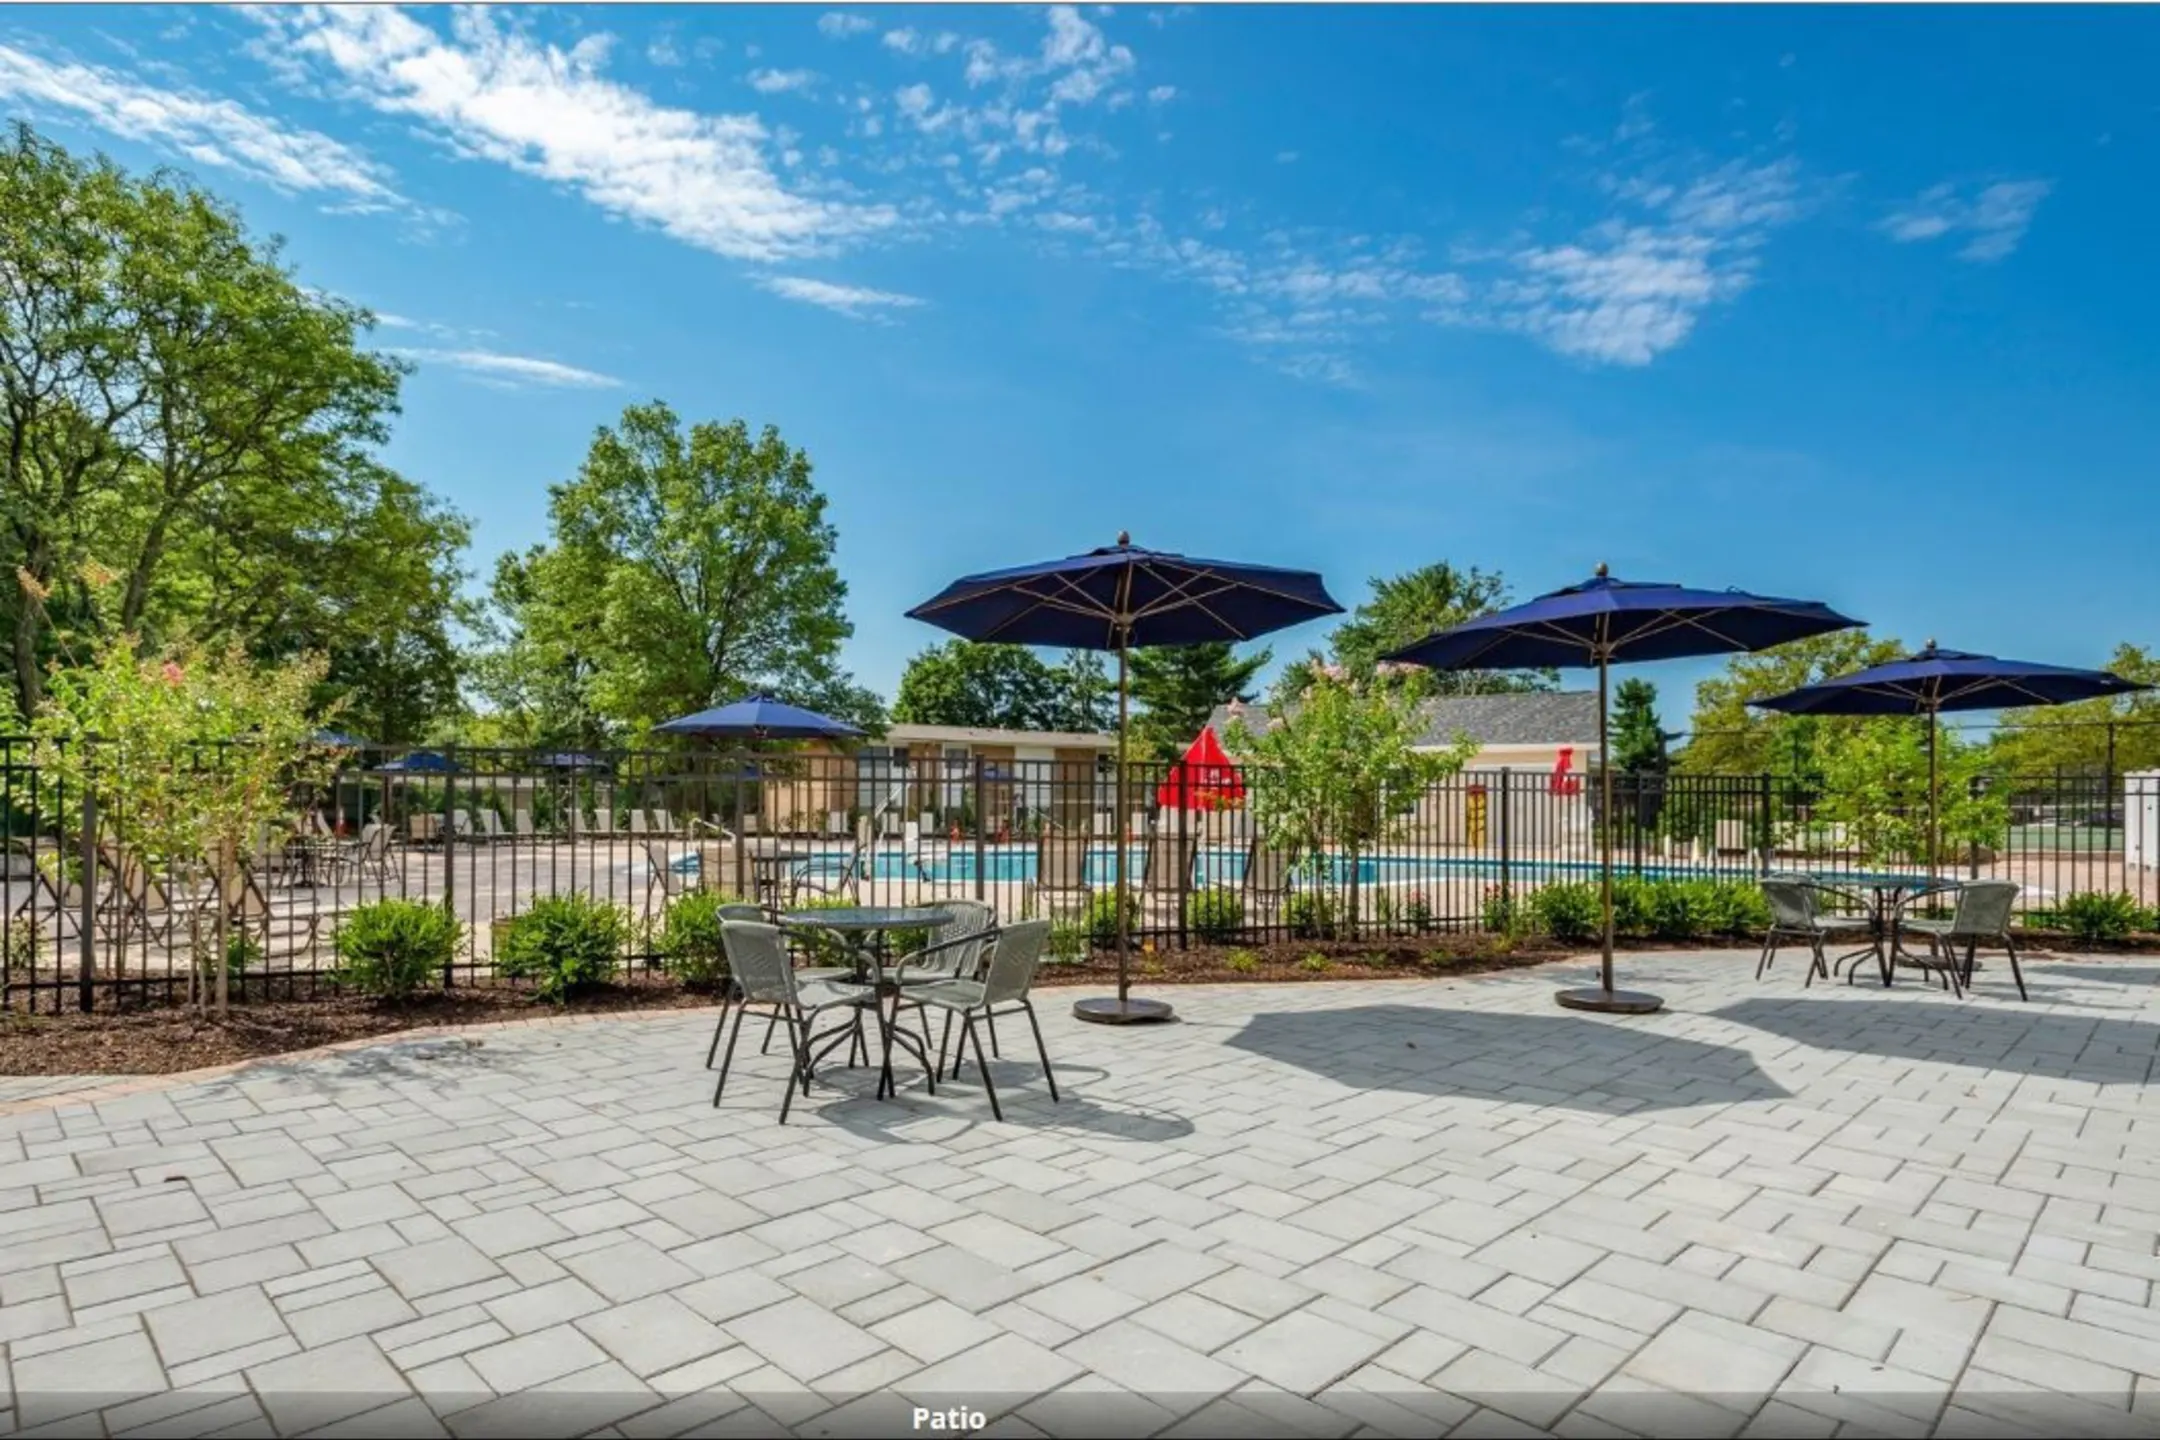 Patio / Deck - The Park at Franklin - Somerset, NJ